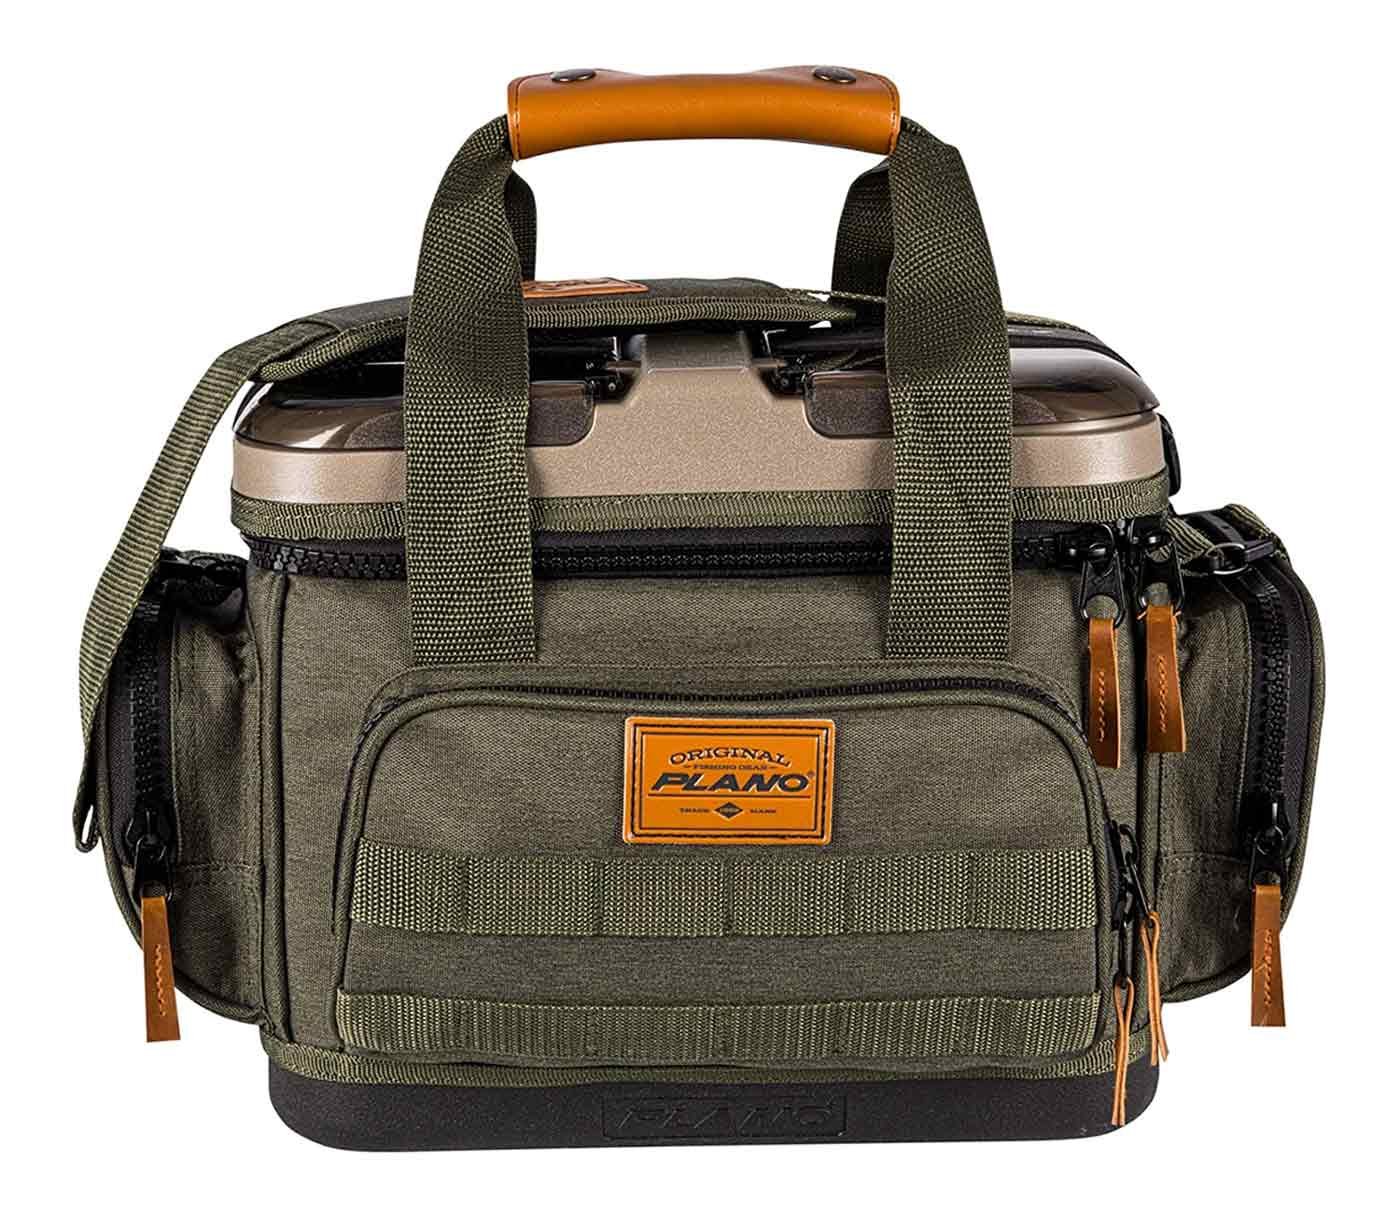 Plano A-Series Tackle Bags